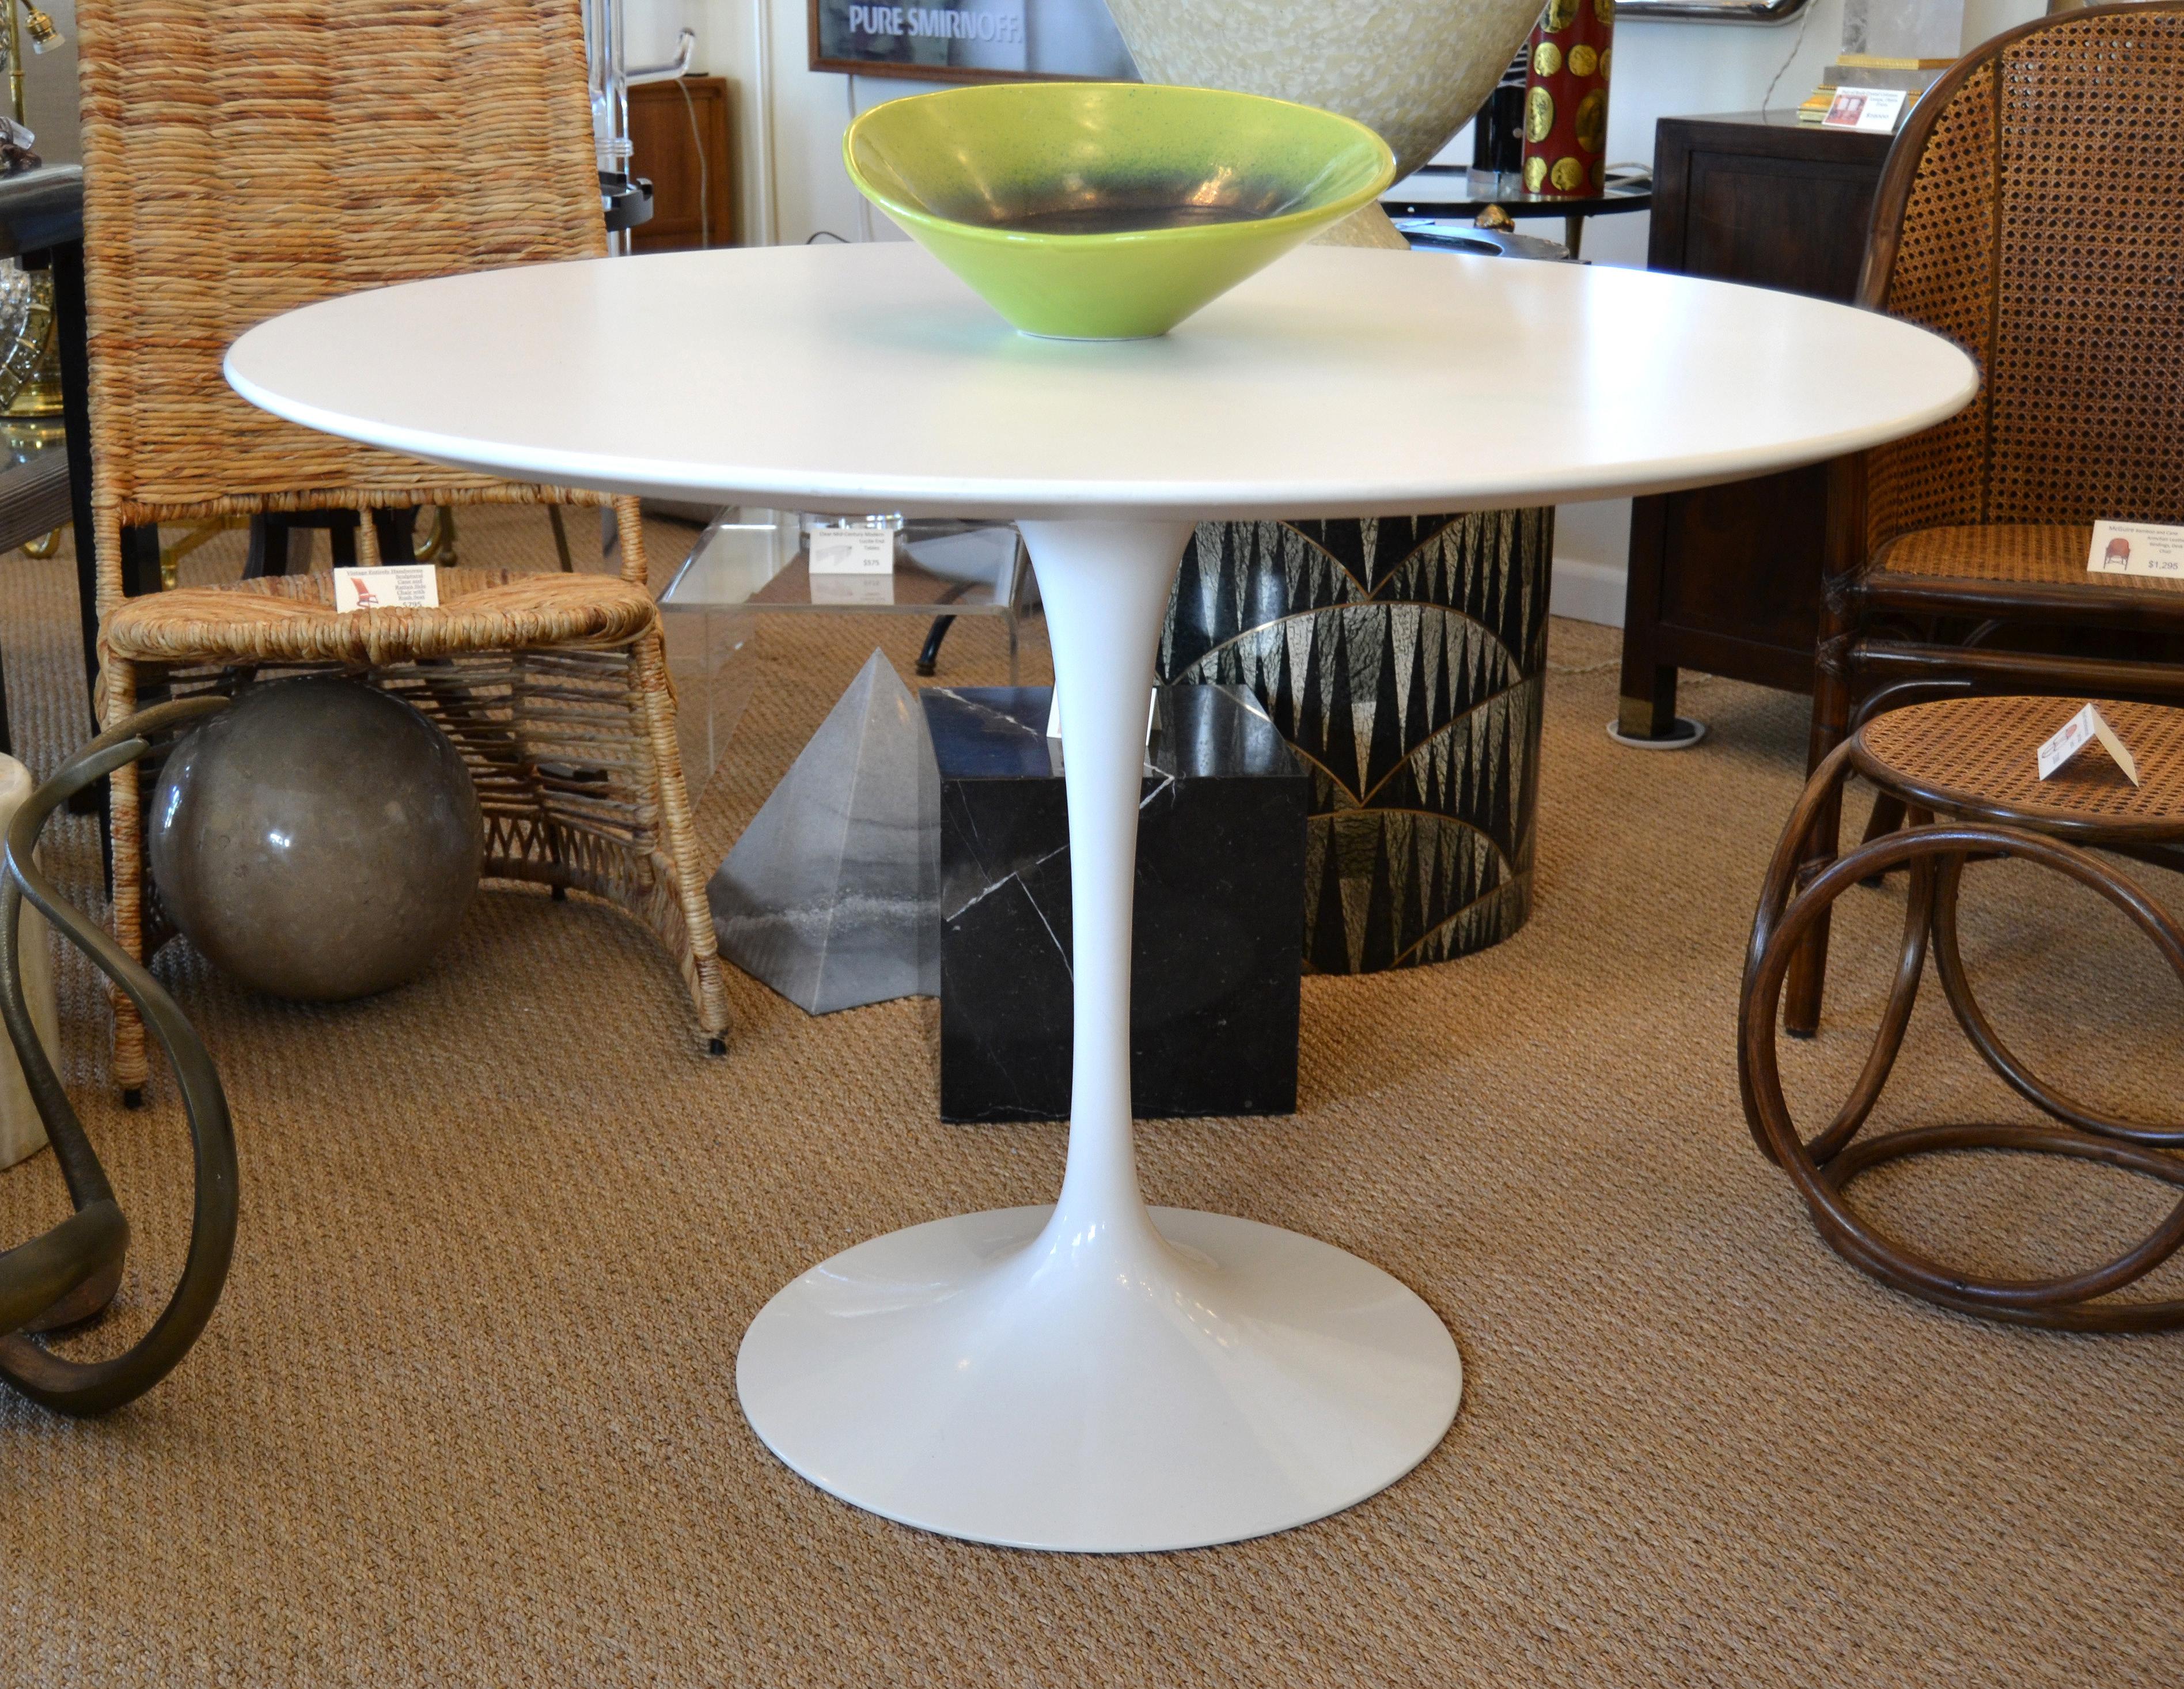 Original Eero Saarinen round 42 inches diameter antique white laminated tulip dining table Knoll.
The Top is 1.06 inches thick has an antique white satin smooth laminate with beveled edge.
The Base is heavy molded cast aluminum with white glossy